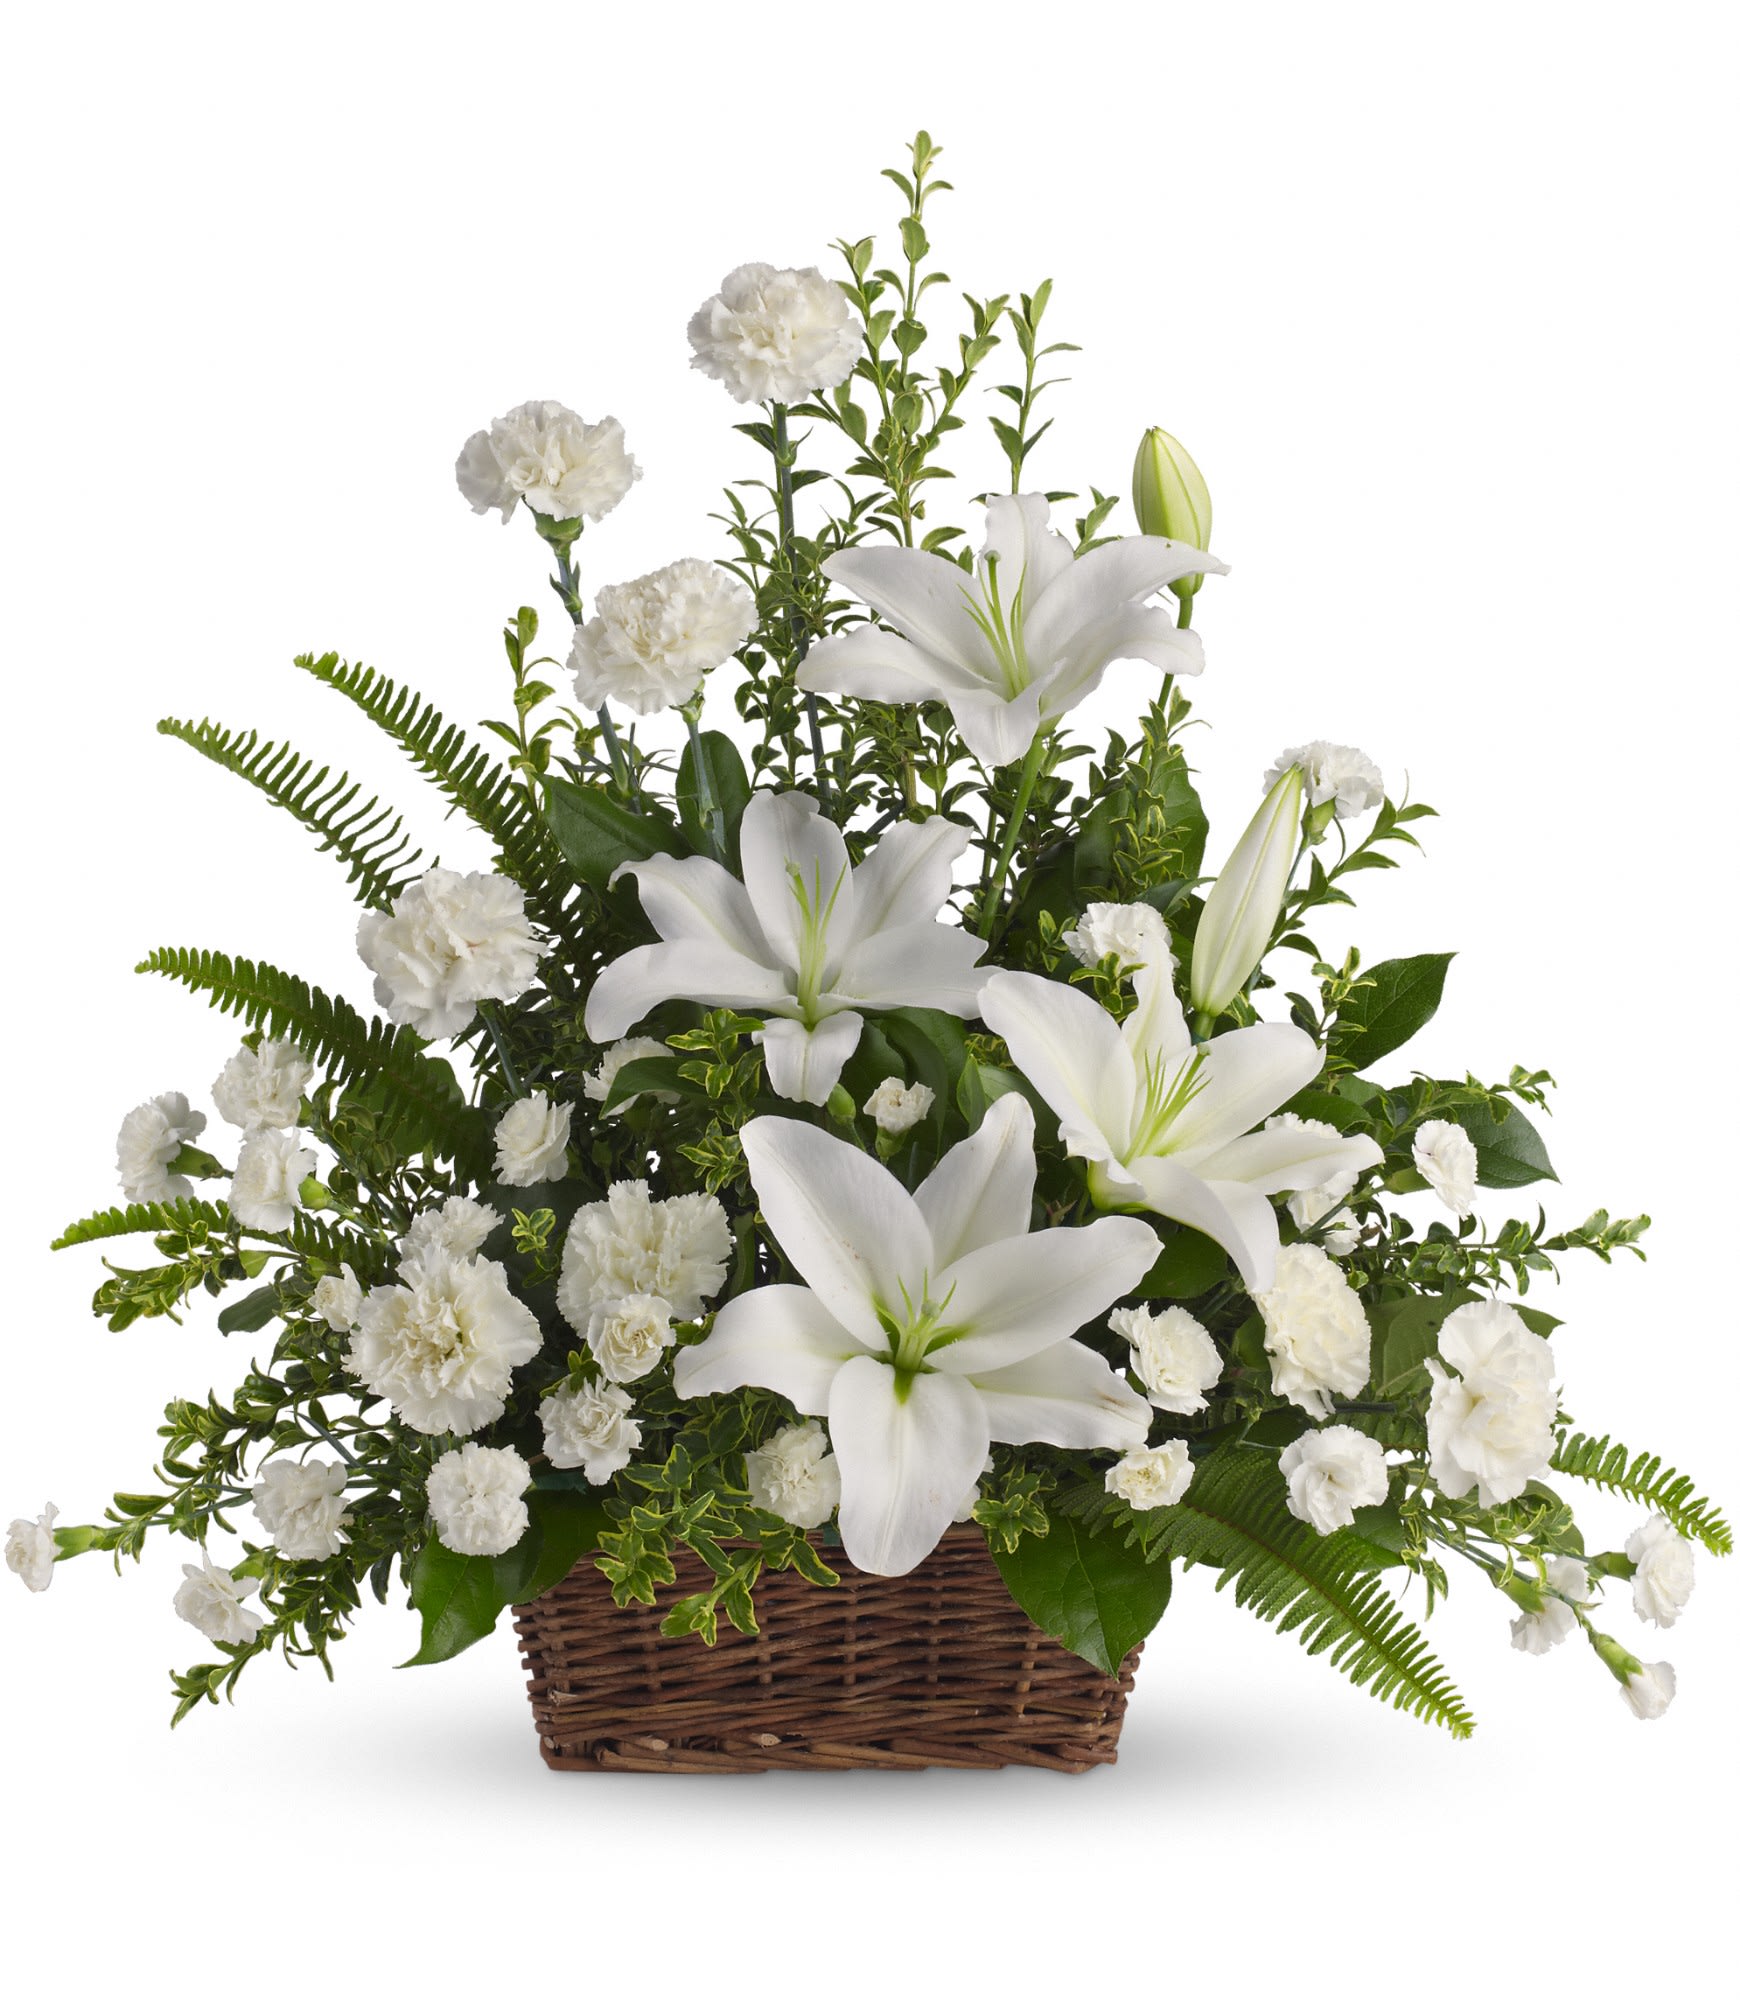 Peaceful White Lilies Basket by Teleflora - Whether you send this beautiful arrangement to the family home or to the service, all will appreciate its elegance and grace. The contrast of brilliant white blossoms and dazzling greenery create a wonderfully calm and dignified setting. 